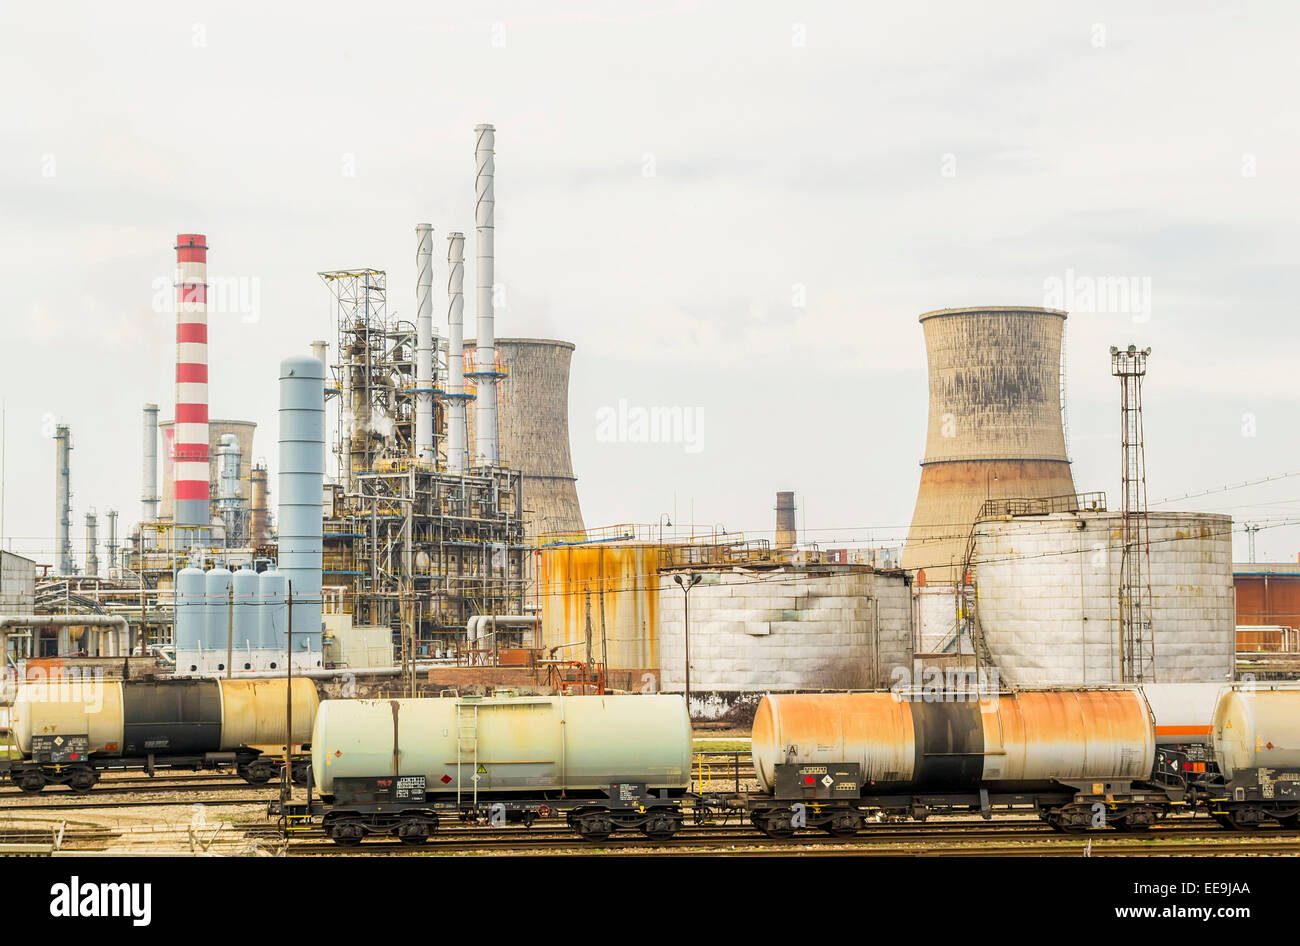 Oil tankers loaded with fuel at an oil and gas refinery Stock Photo